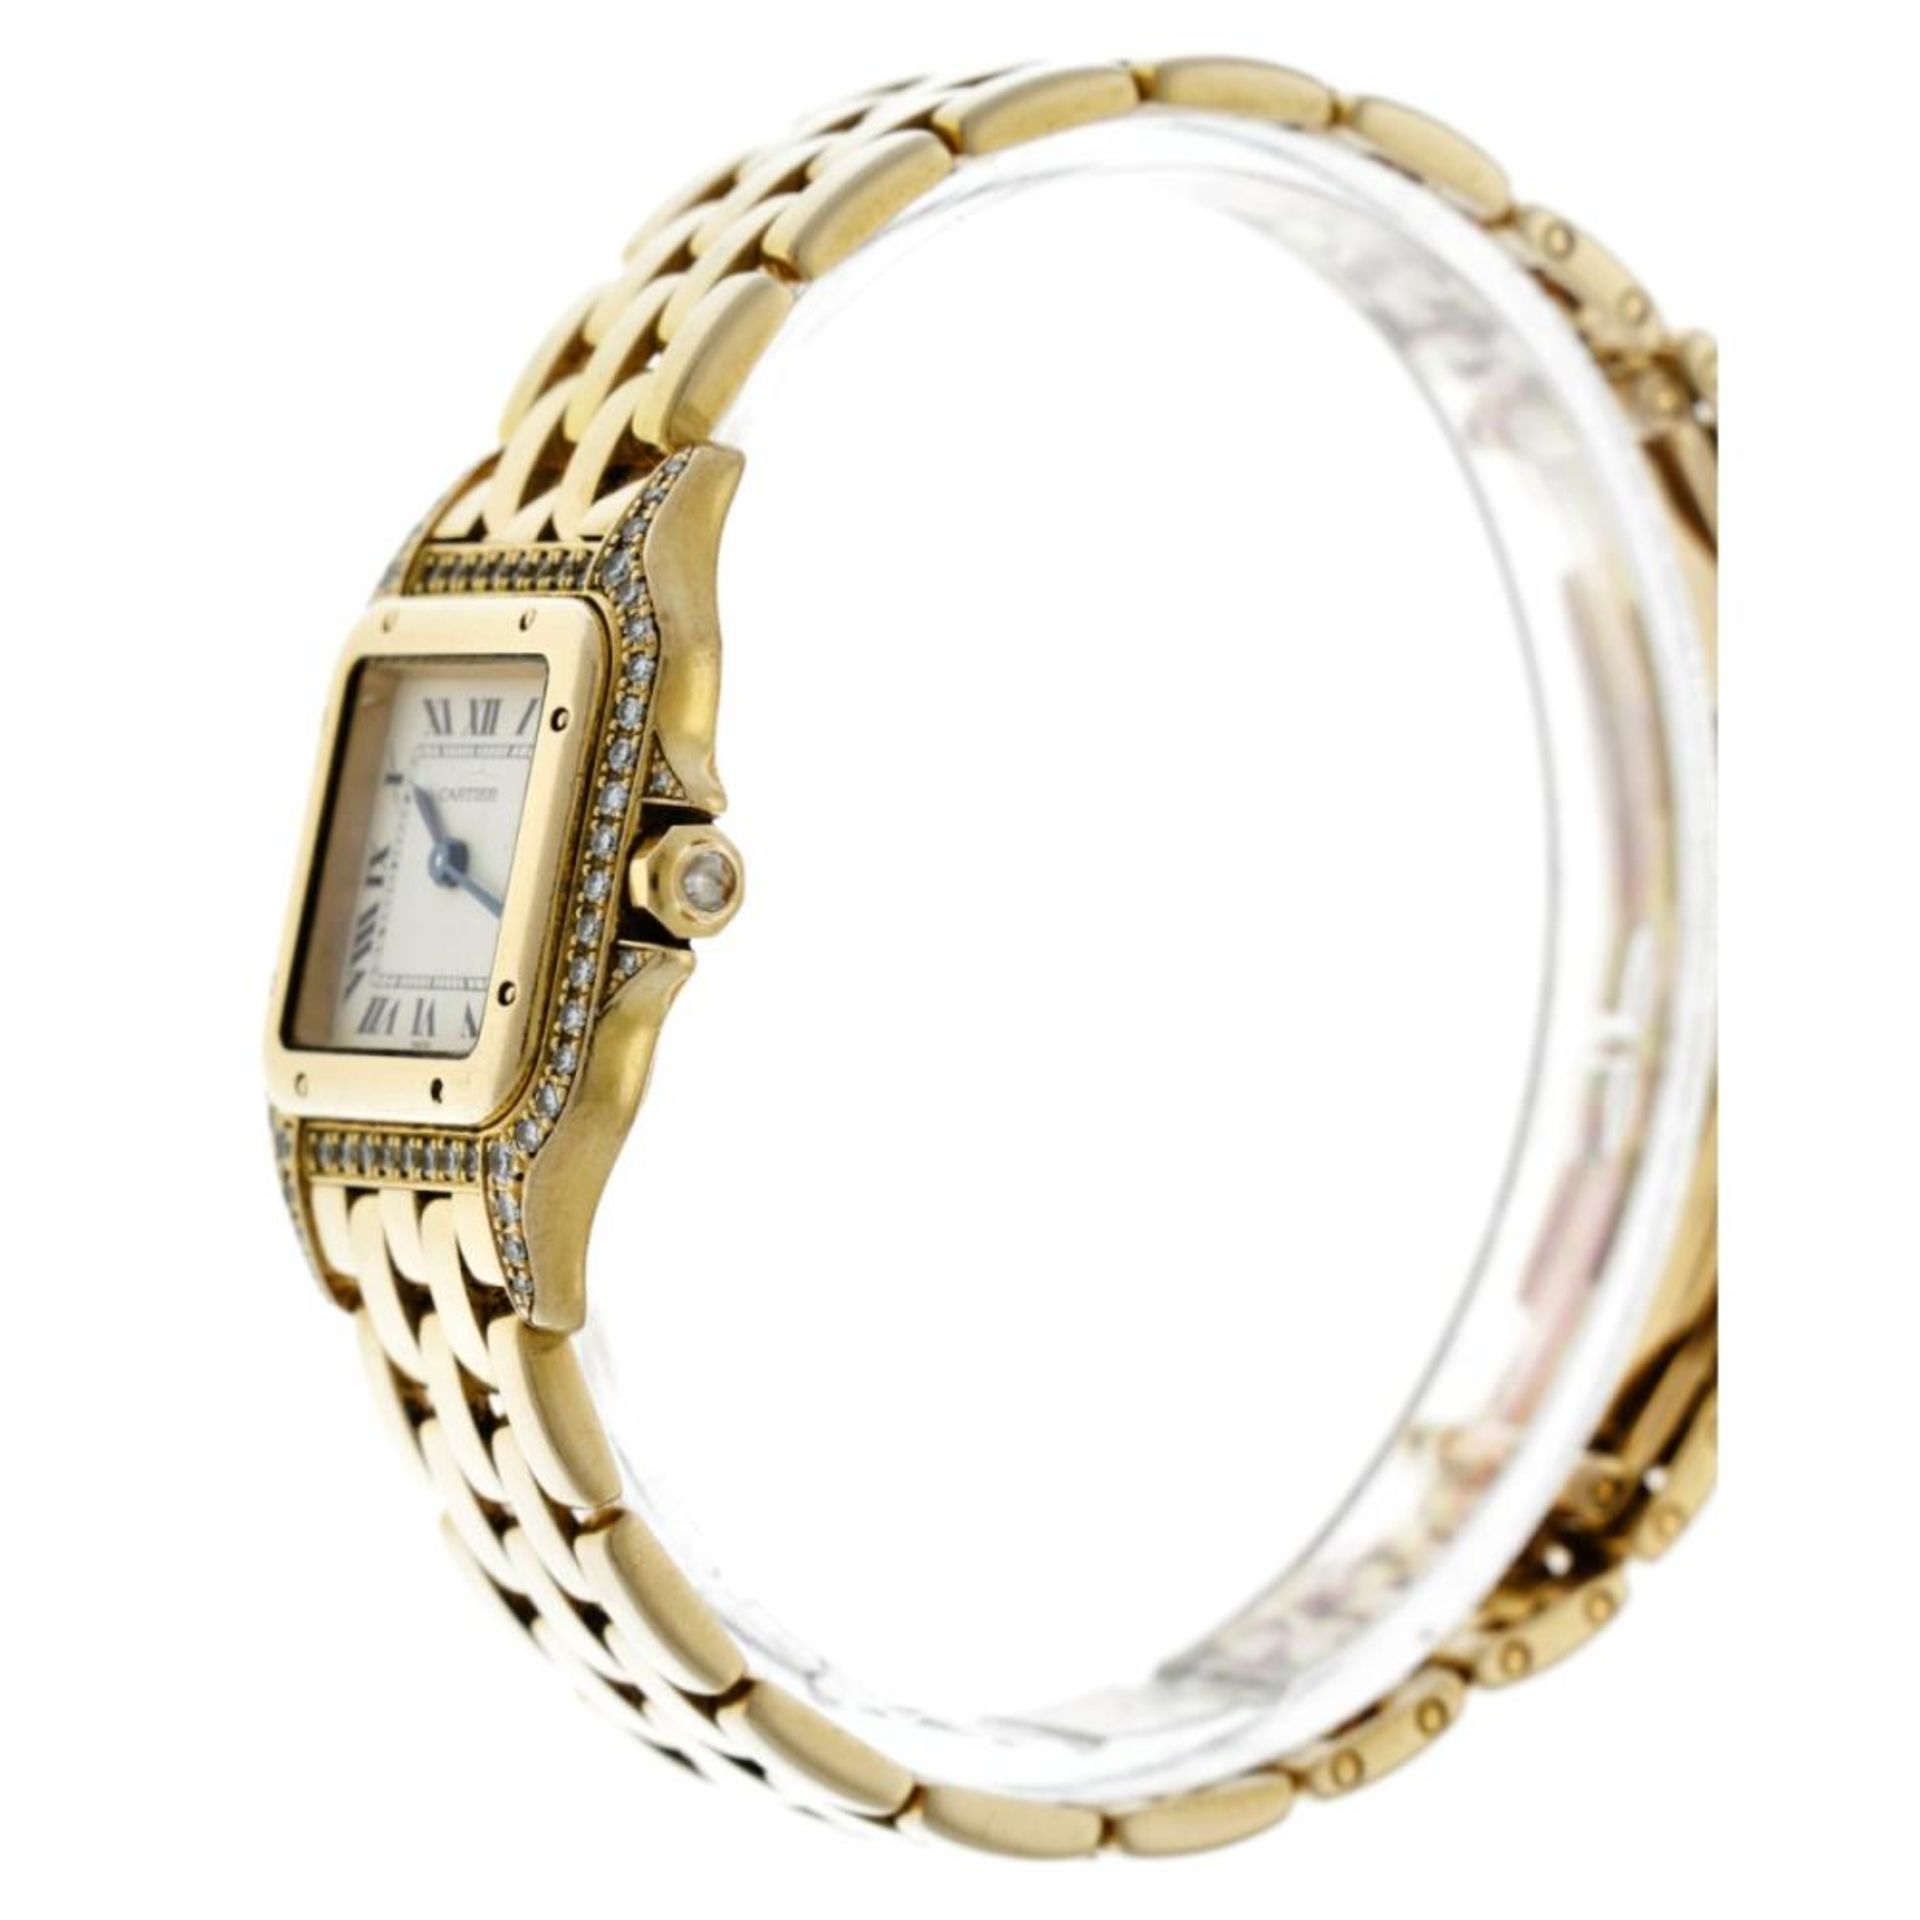 Cartier Panthere 1280 - Ladies watch - approx. 1995. - Image 10 of 10